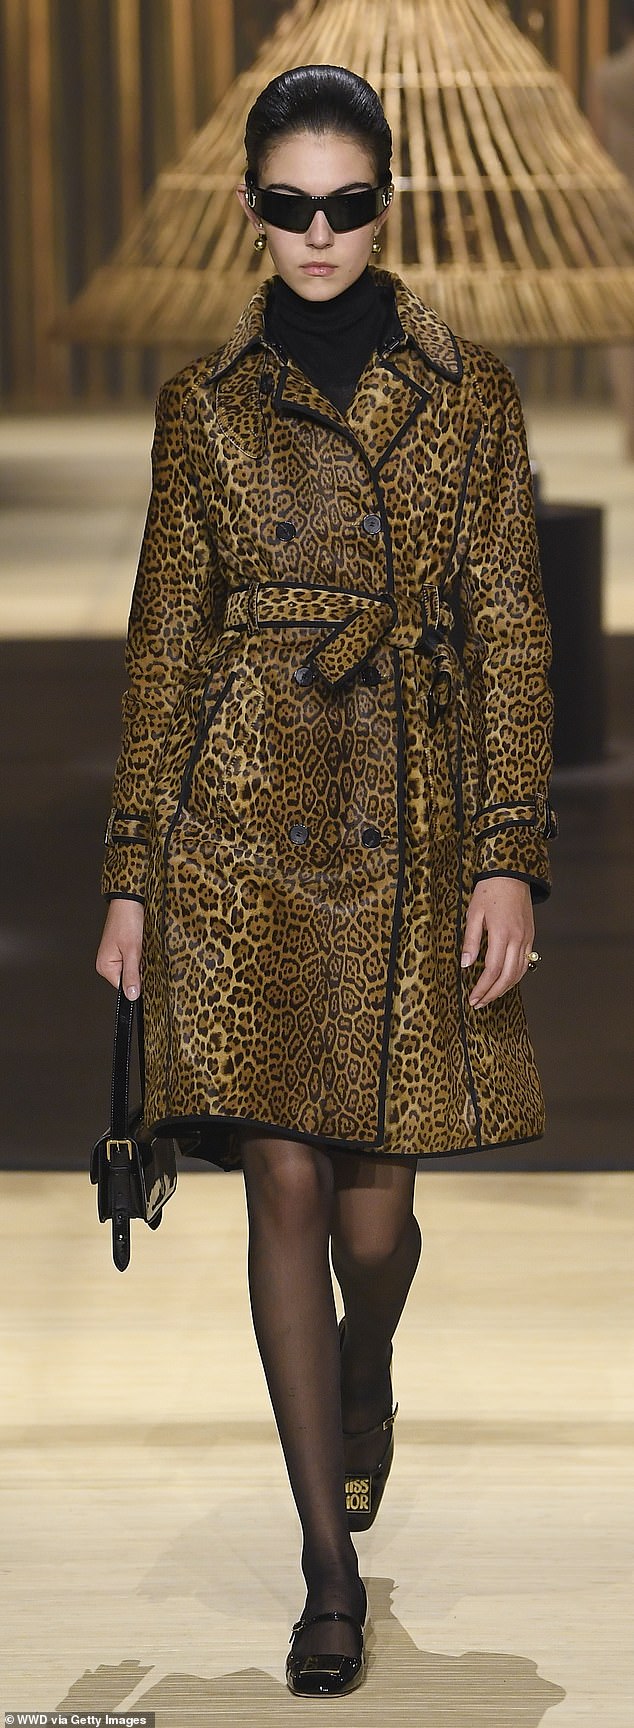 Dior's fall collection shown at Paris Fashion Week included cropped, paneled trench coats.